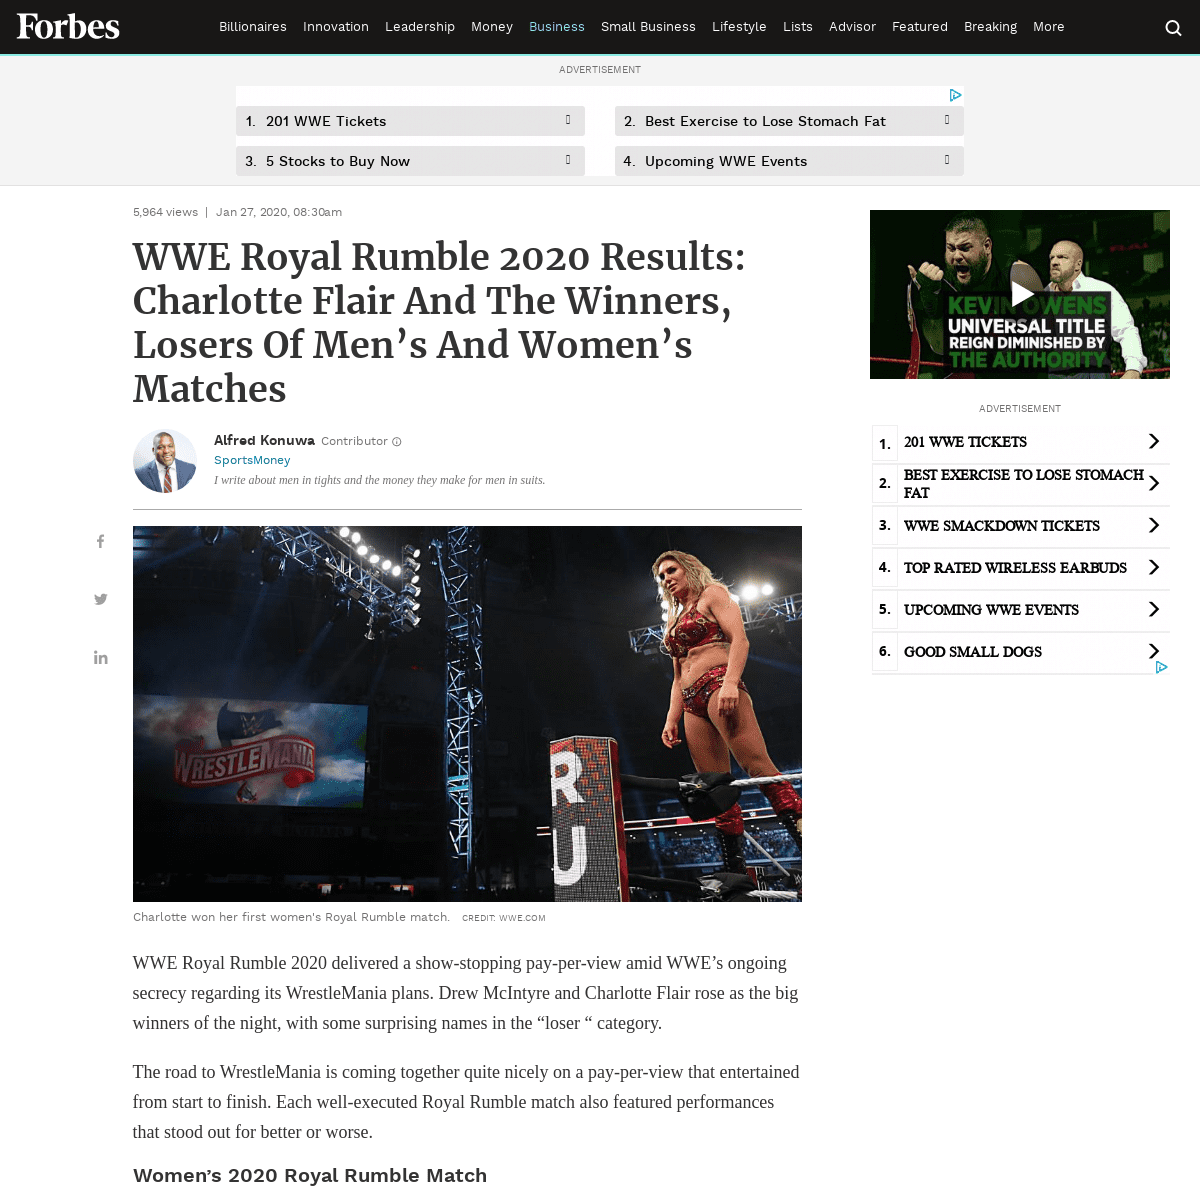 A complete backup of www.forbes.com/sites/alfredkonuwa/2020/01/27/wwe-royal-rumble-2020-results-charlotte-flair-and-the-winners-